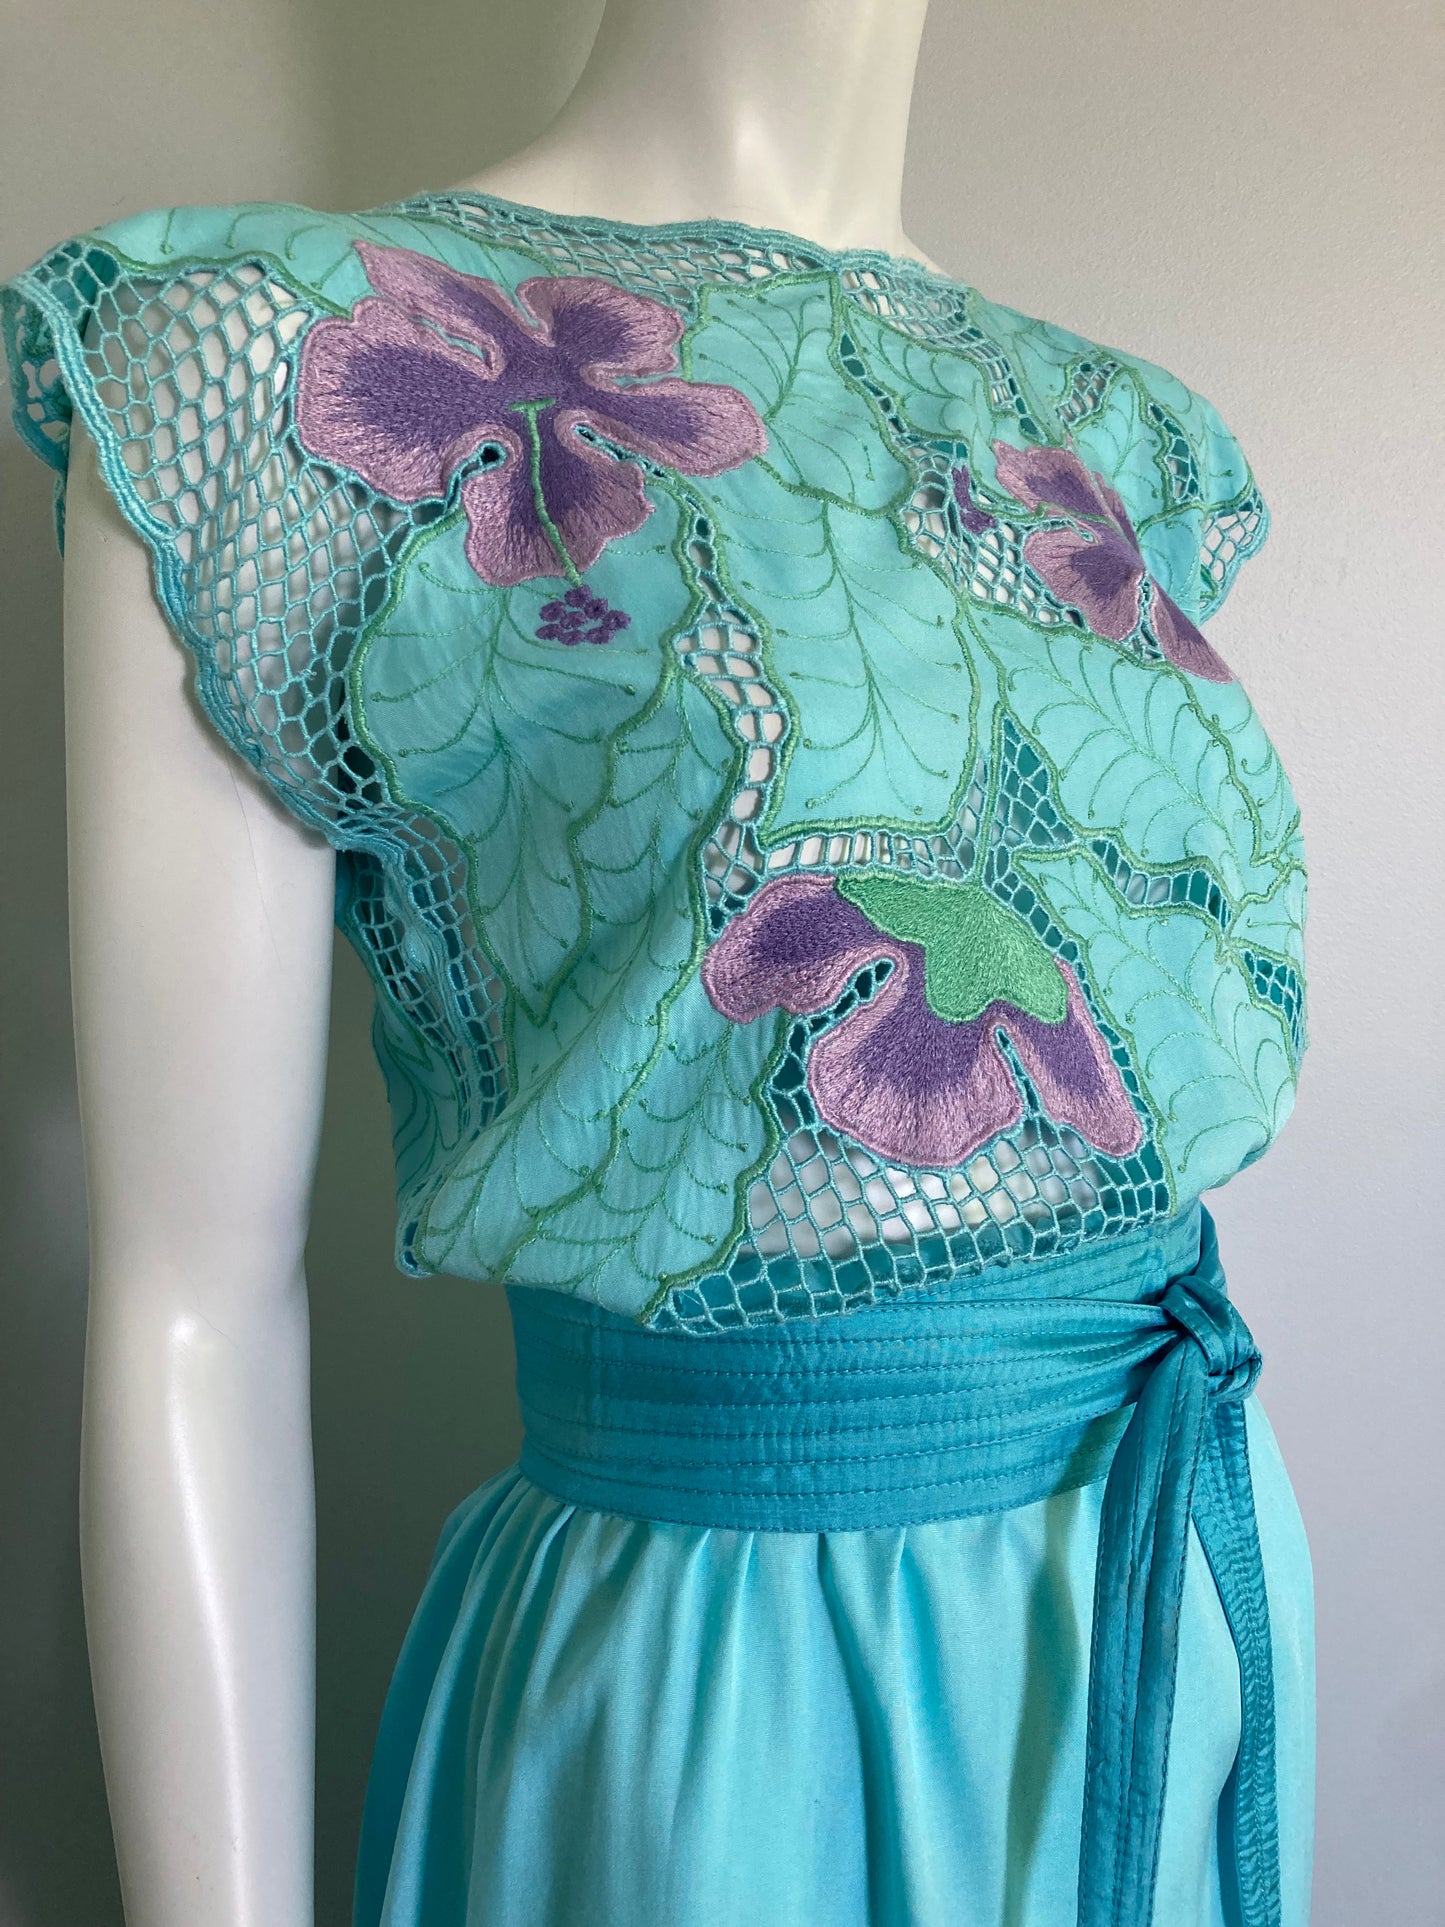 1980s Embroidered Lacework Turquoise Rayon Boho Dress, Size M